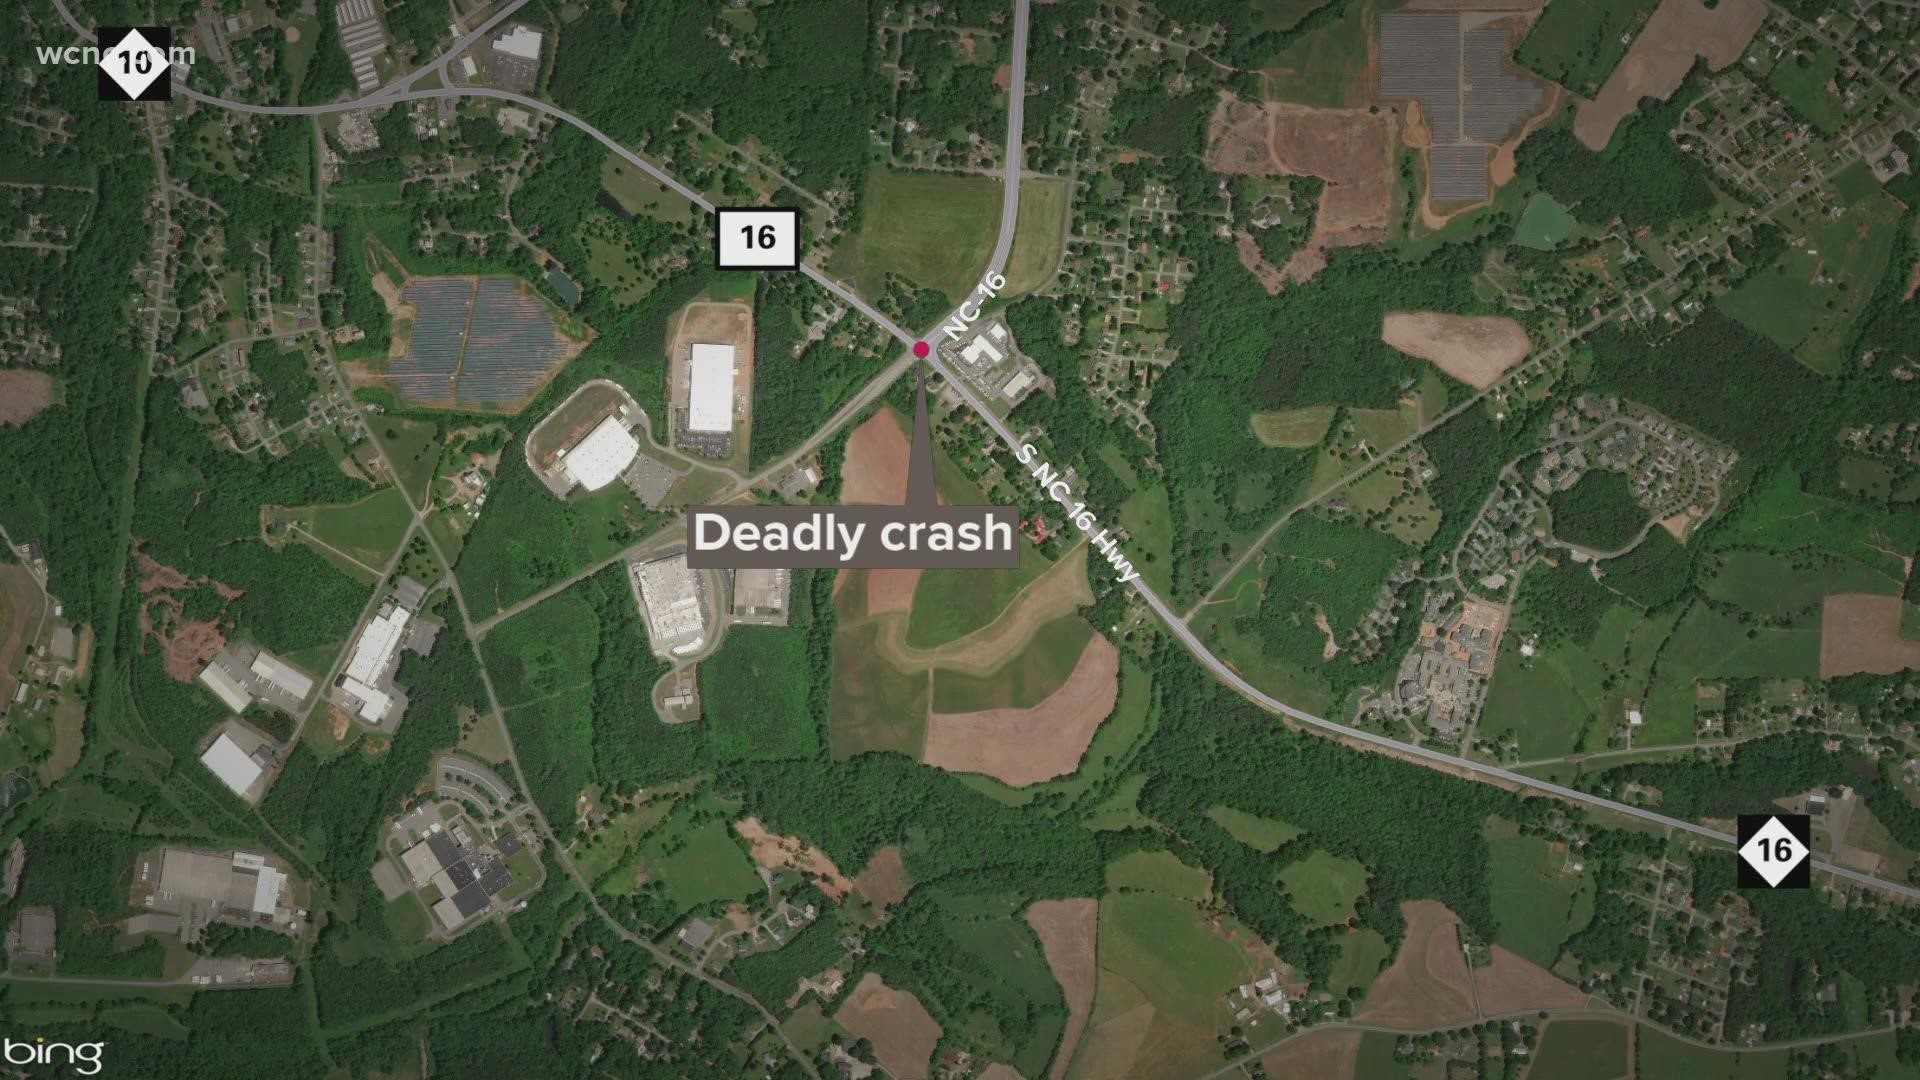 One person has died and two others were injured after a three-vehicle collision involving a school bus in Catawba County Thursday.